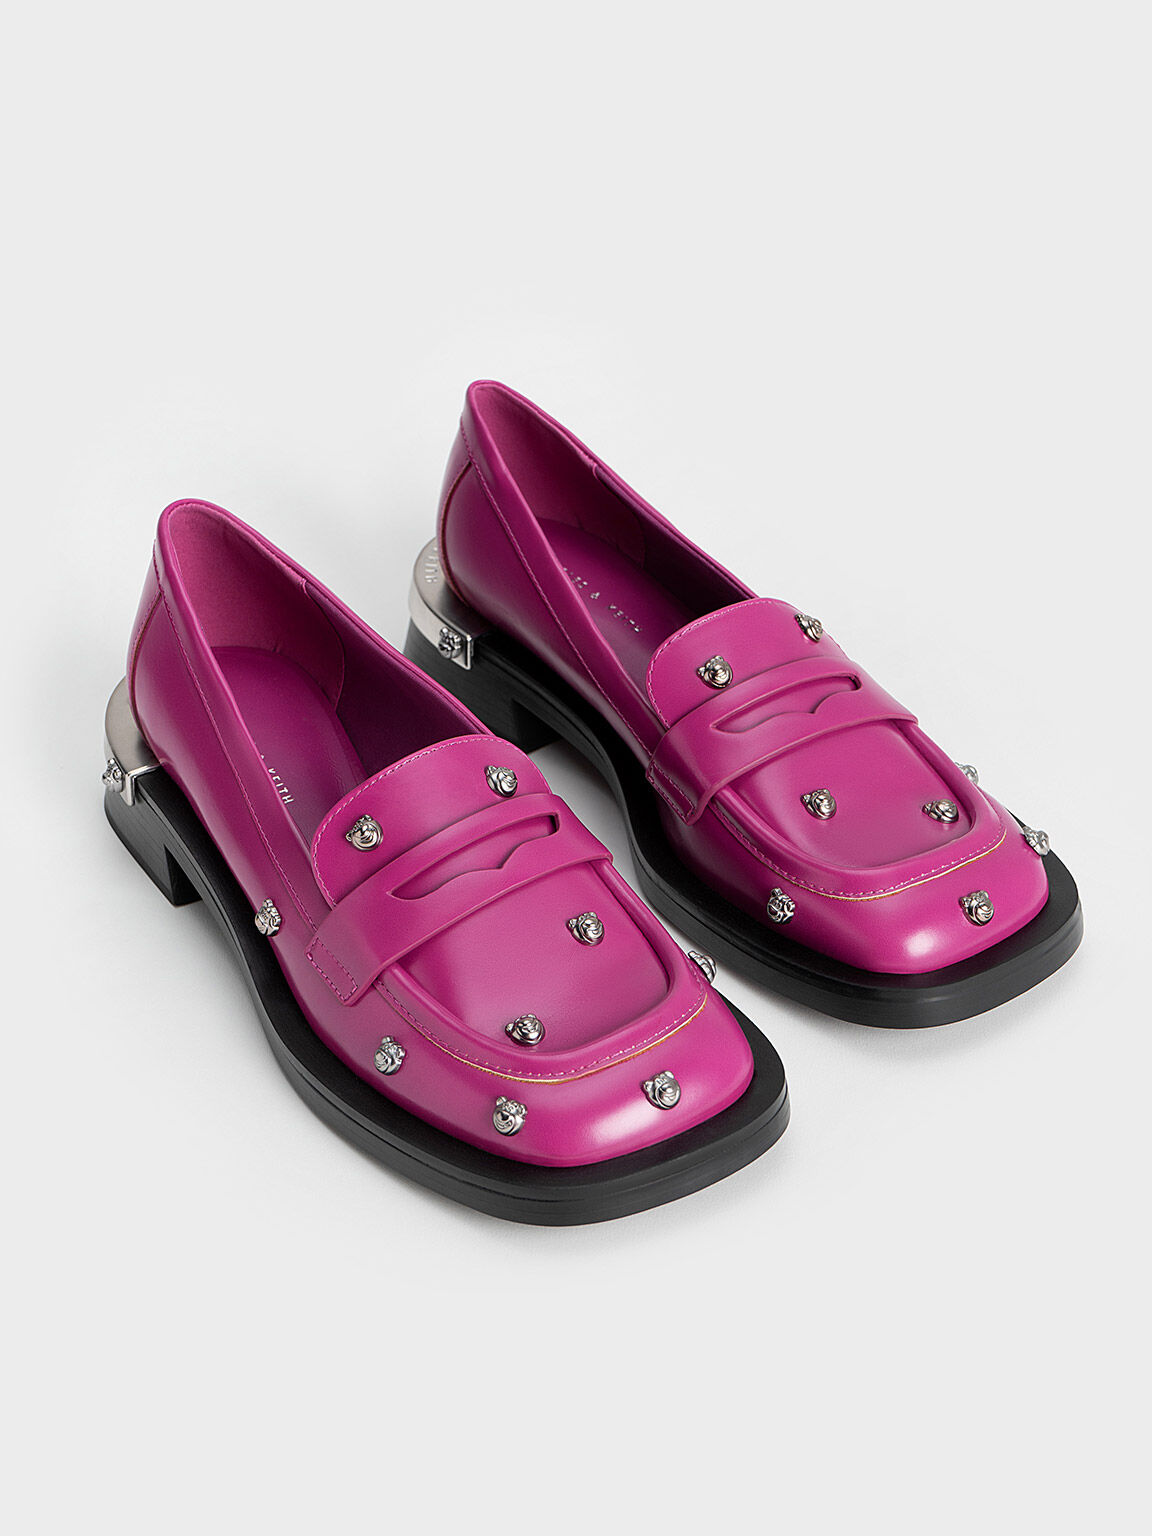 Lotso Studded Penny Loafers, Fuchsia, hi-res